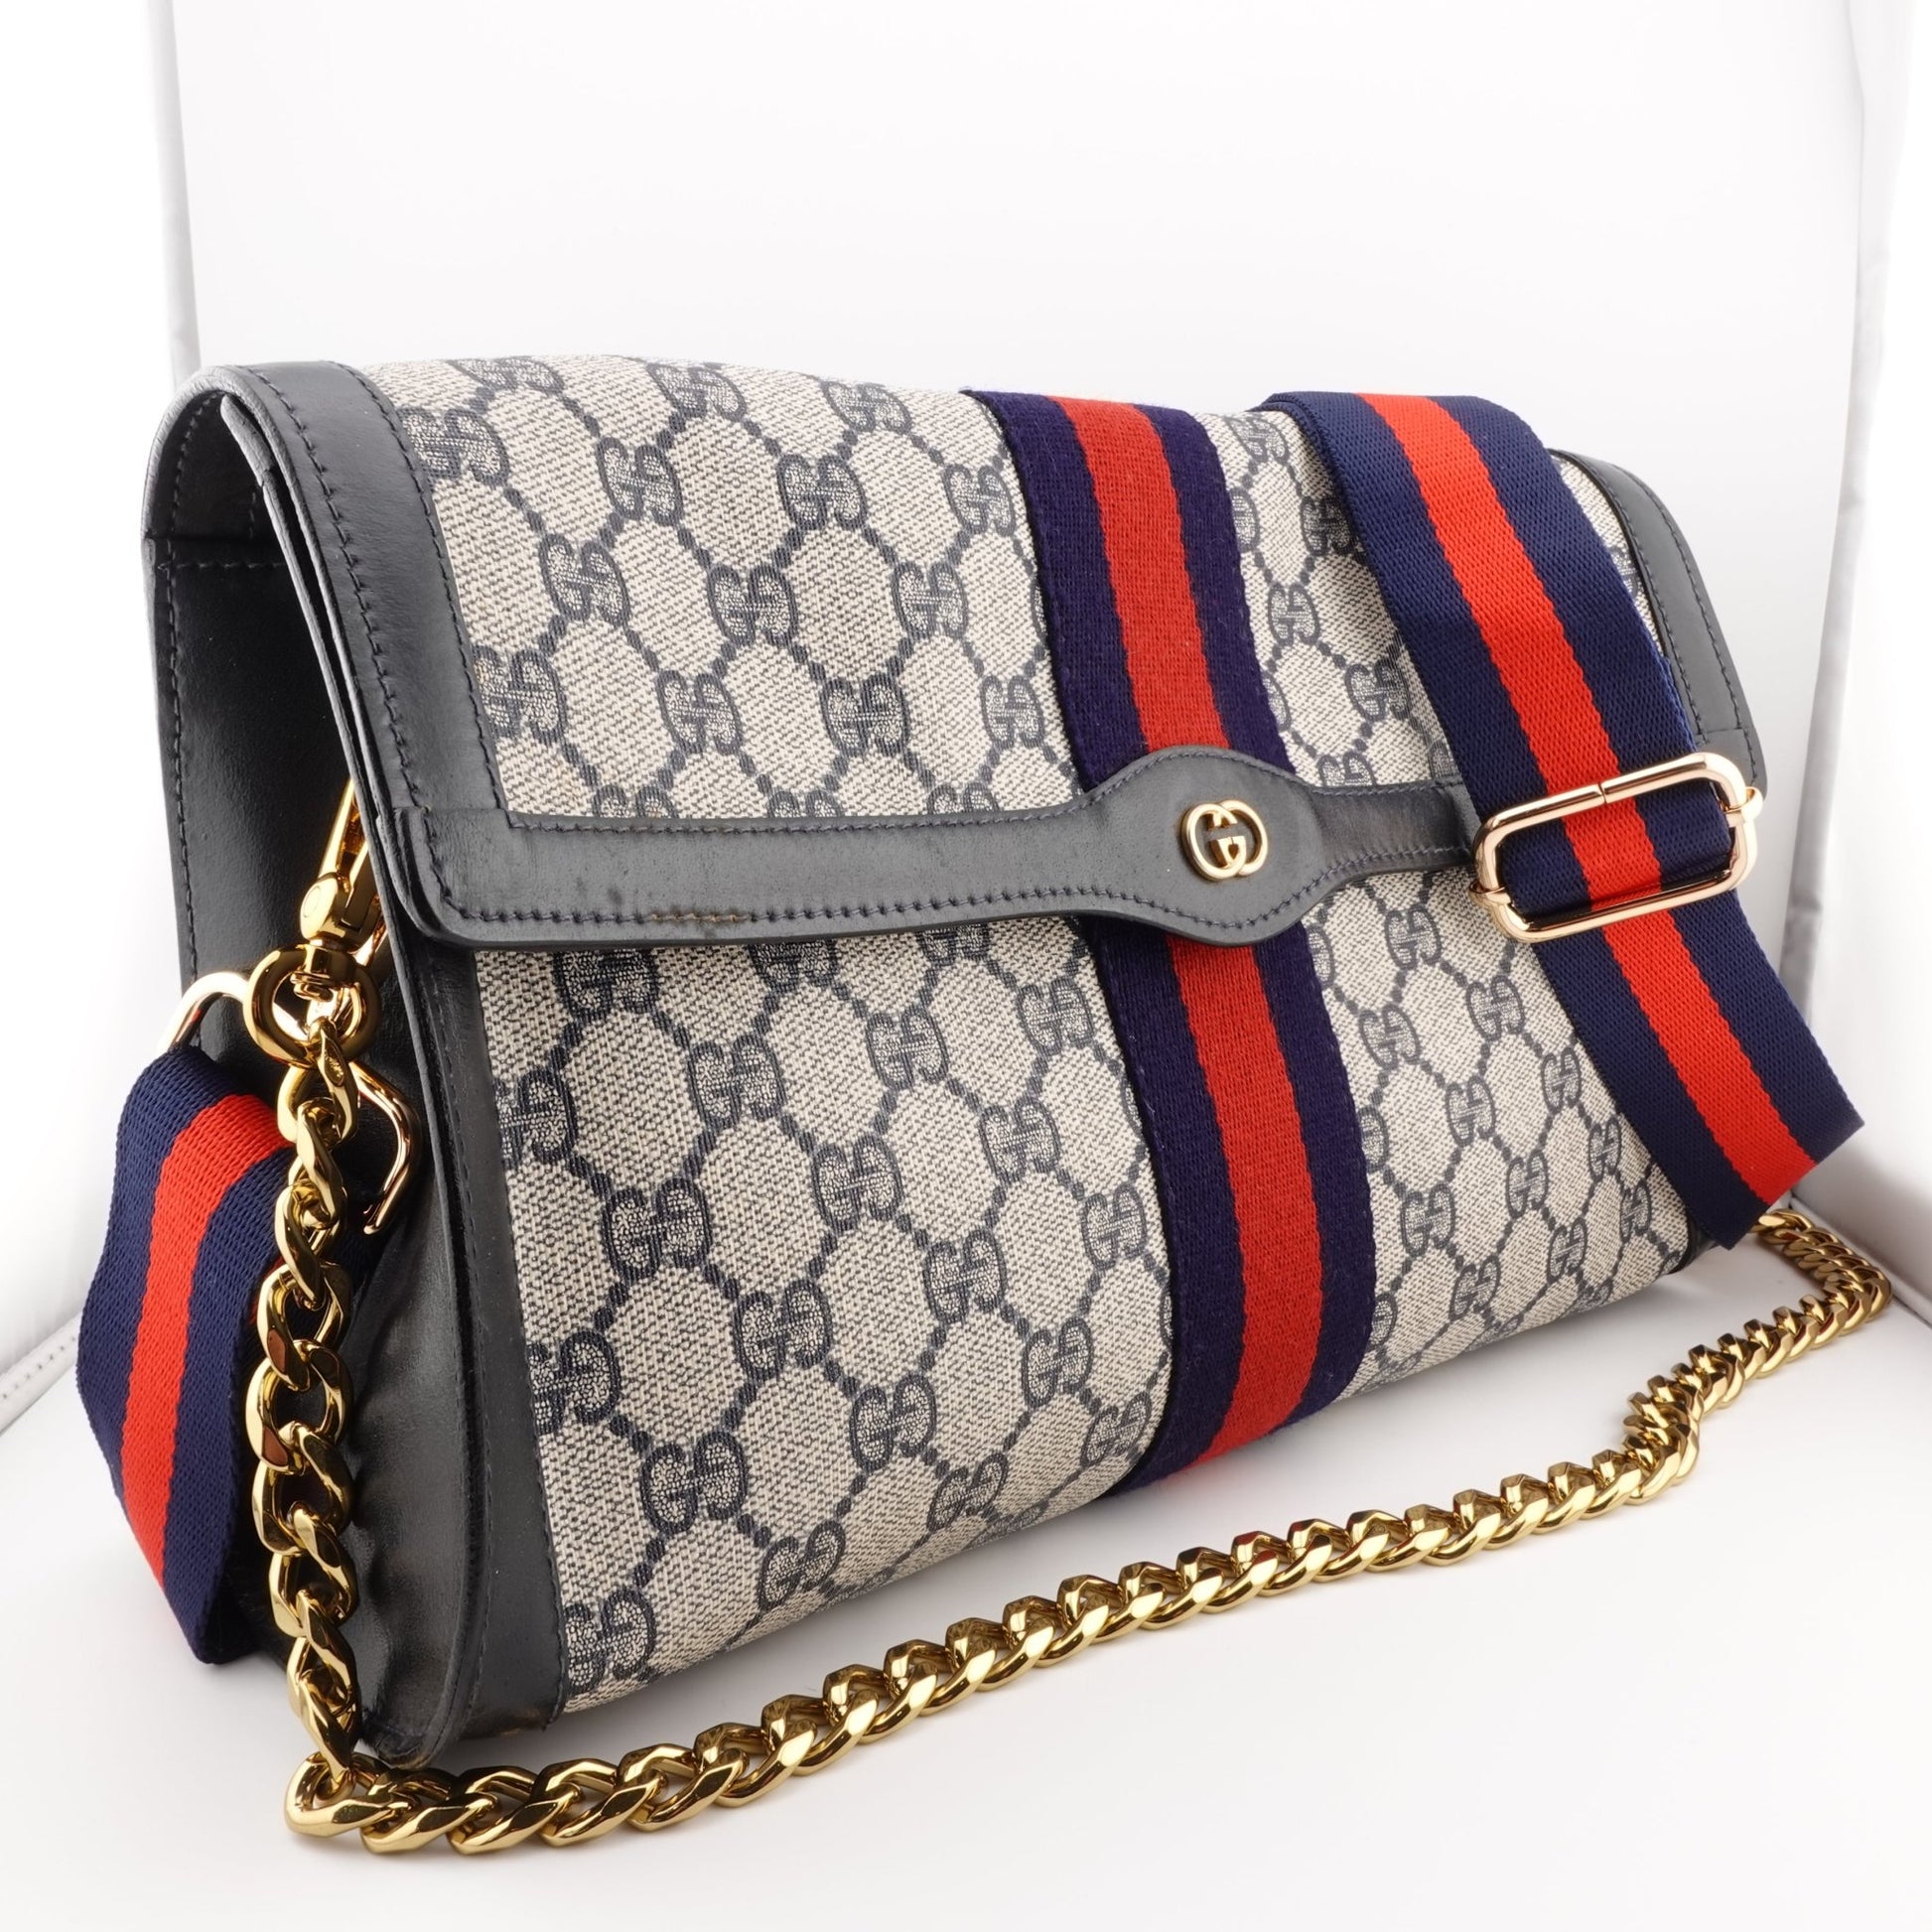 GUCCI Large Ophidia Clutch with Strap & Chain - Bag Envy